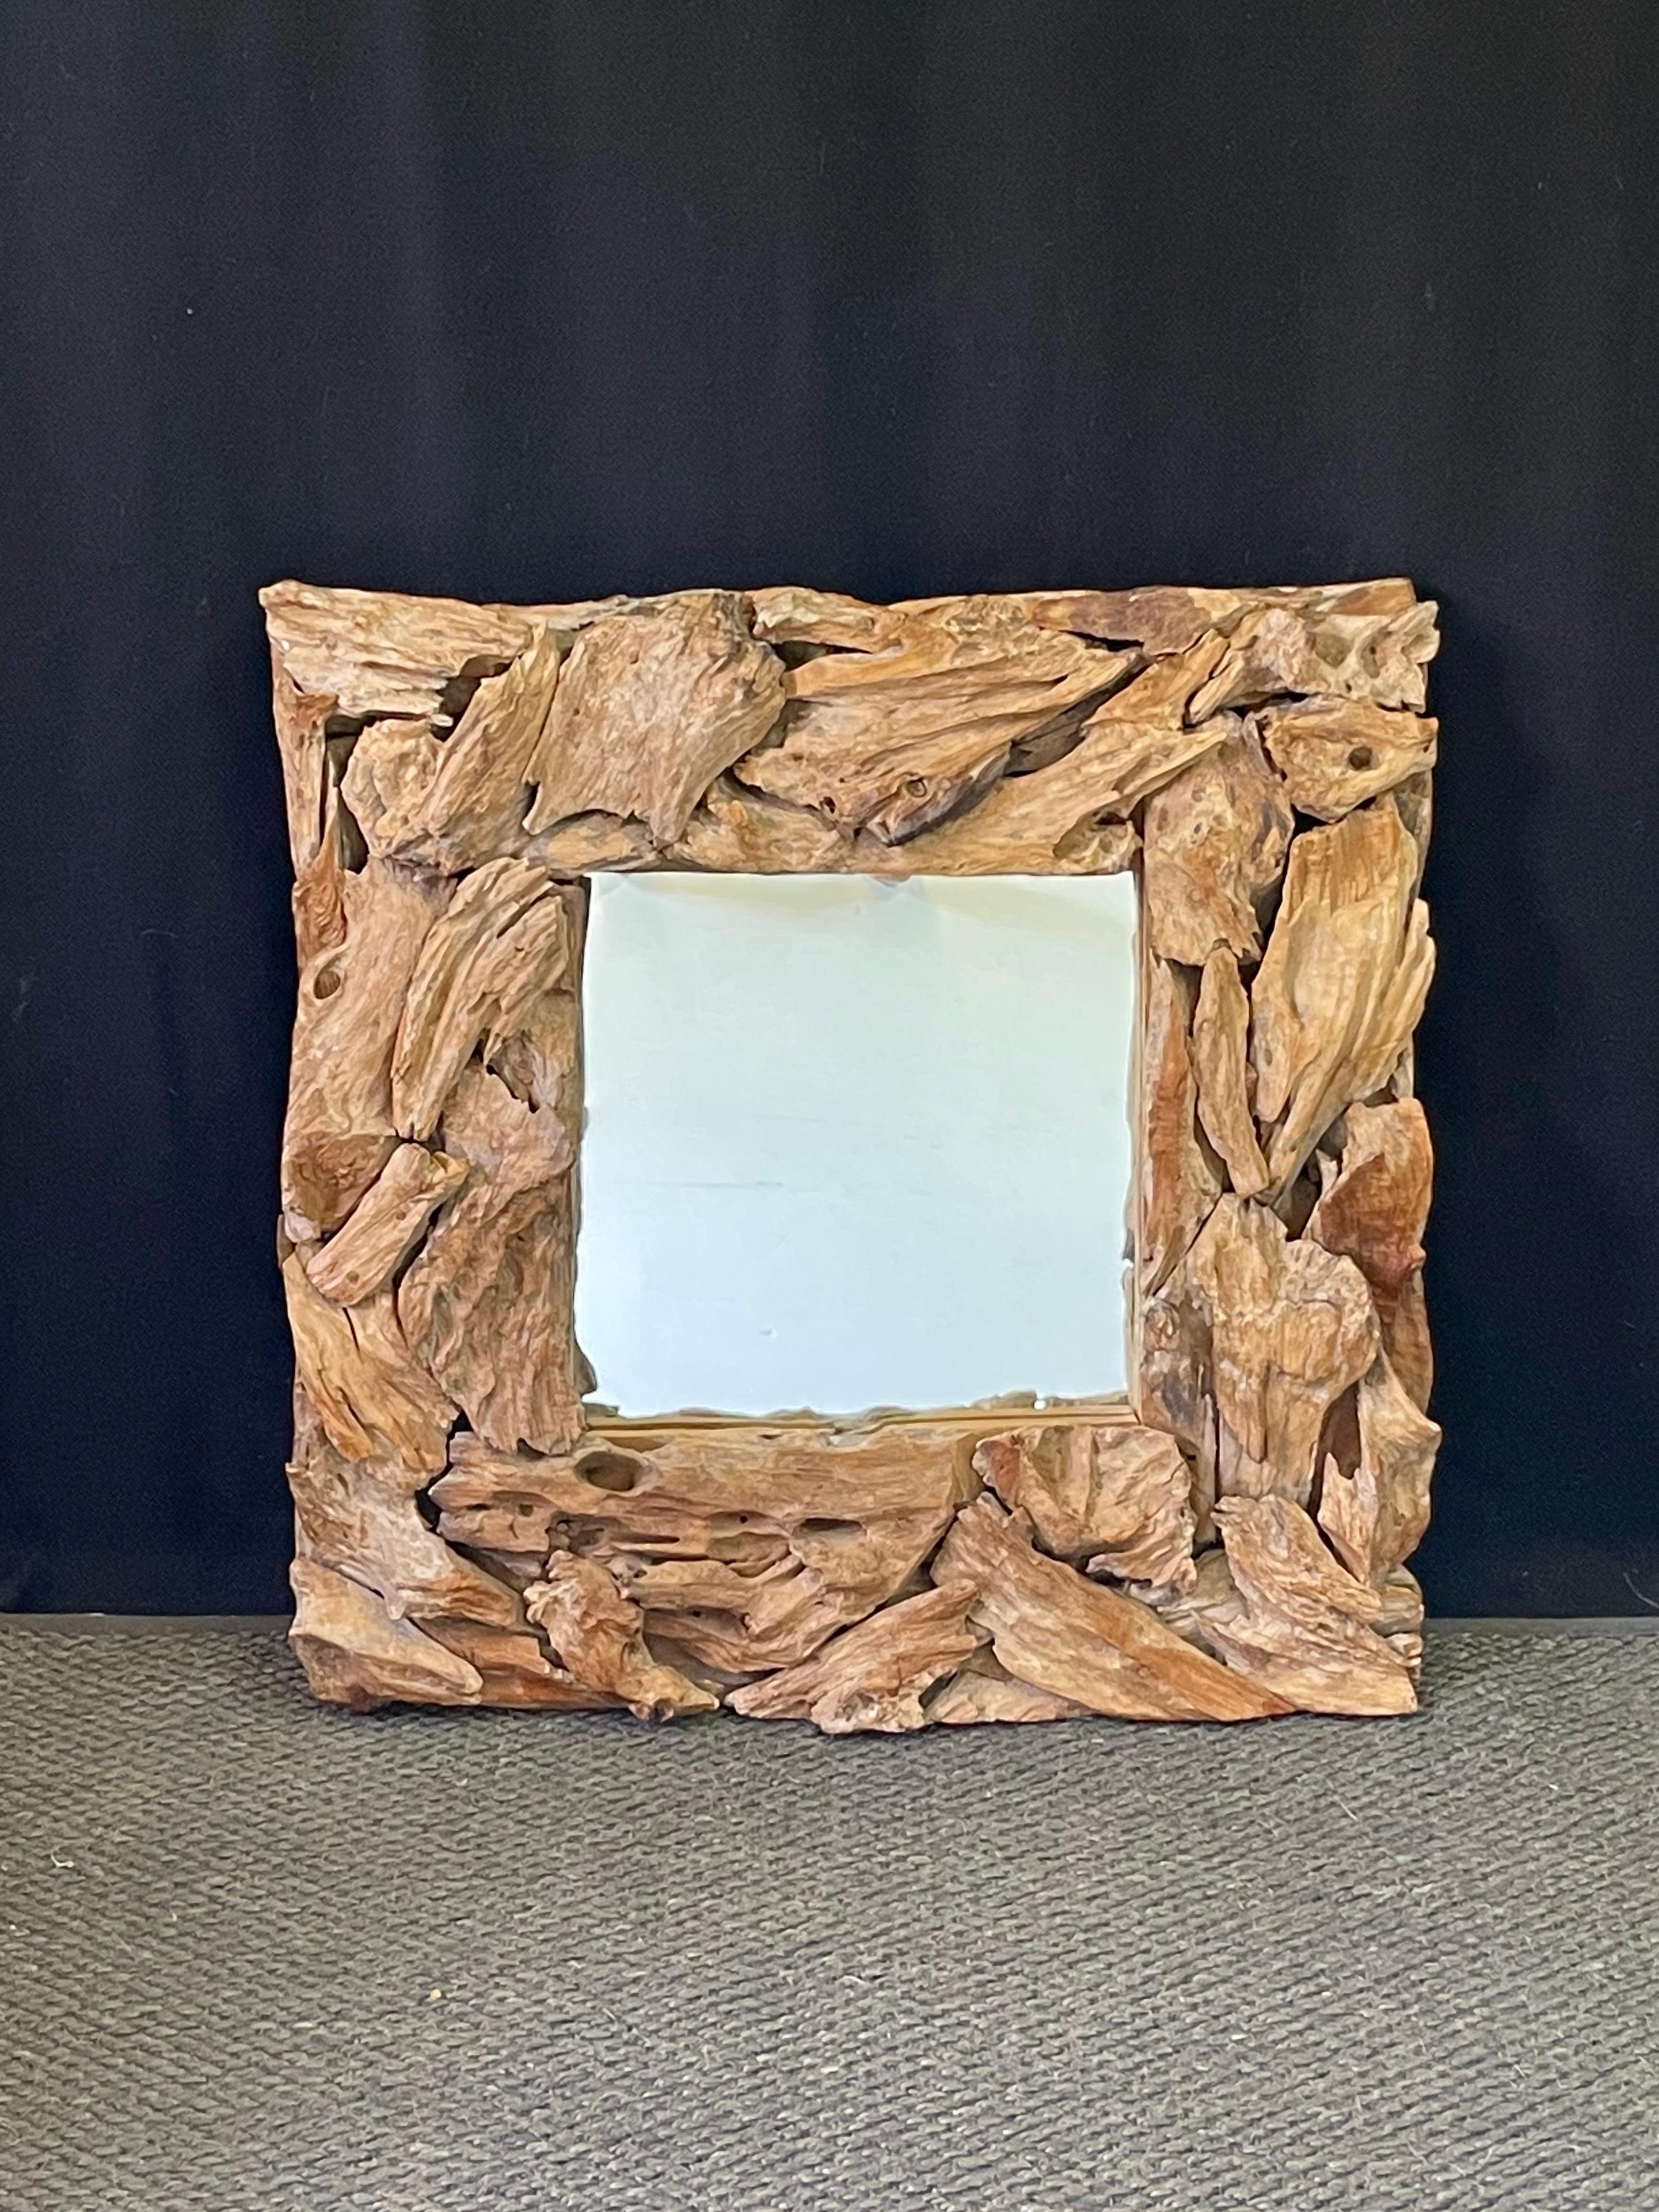 20th Century organic modern driftwood assemblage frame holding a mirror. Individual pieces of driftwood have been handcrafted into a textured, rustic, and original frame held by an iron backing. 

Driftwood frame is 32.5